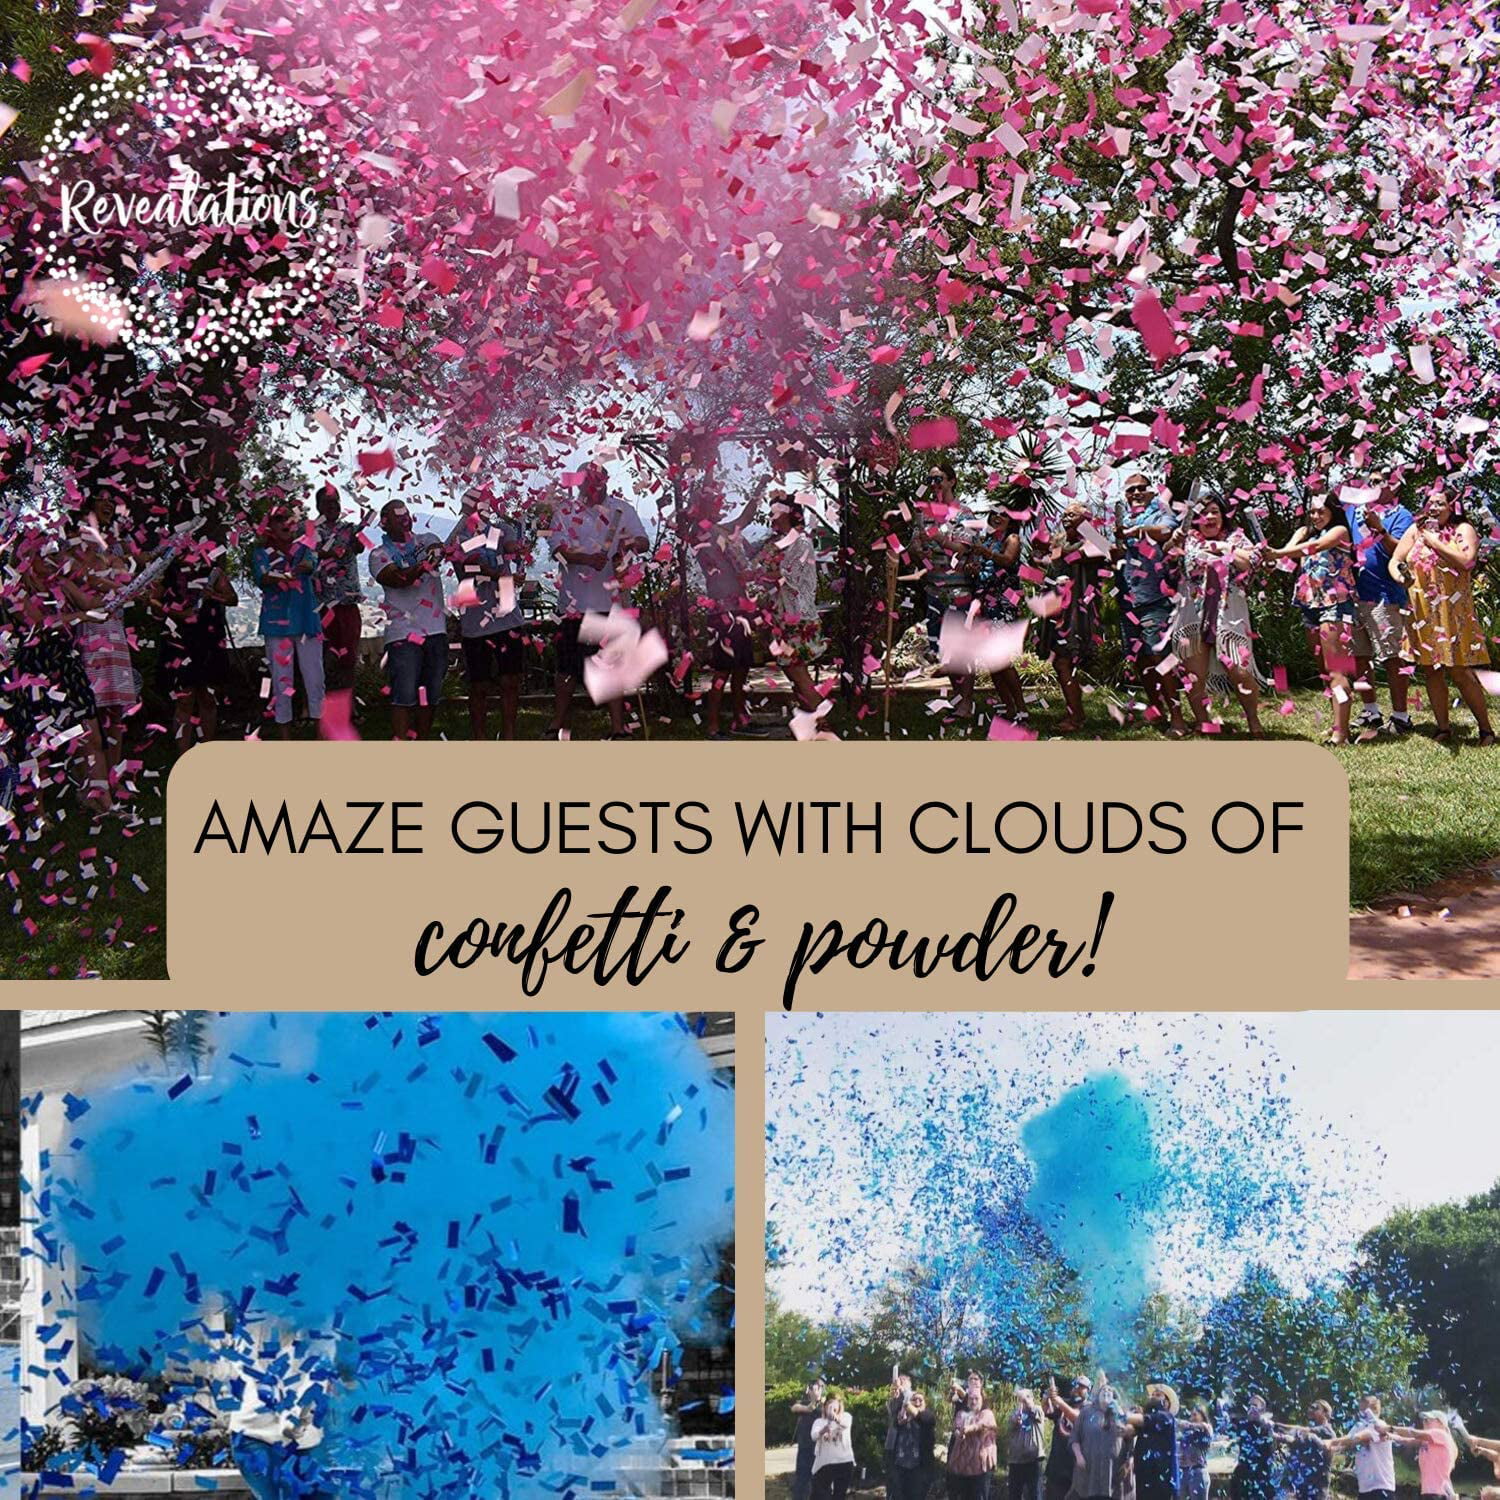 Confetti + Powder + Streamers Gender Reveal Cannons 32 / Light Pink + Dark Pink / Yes - Without Color Label